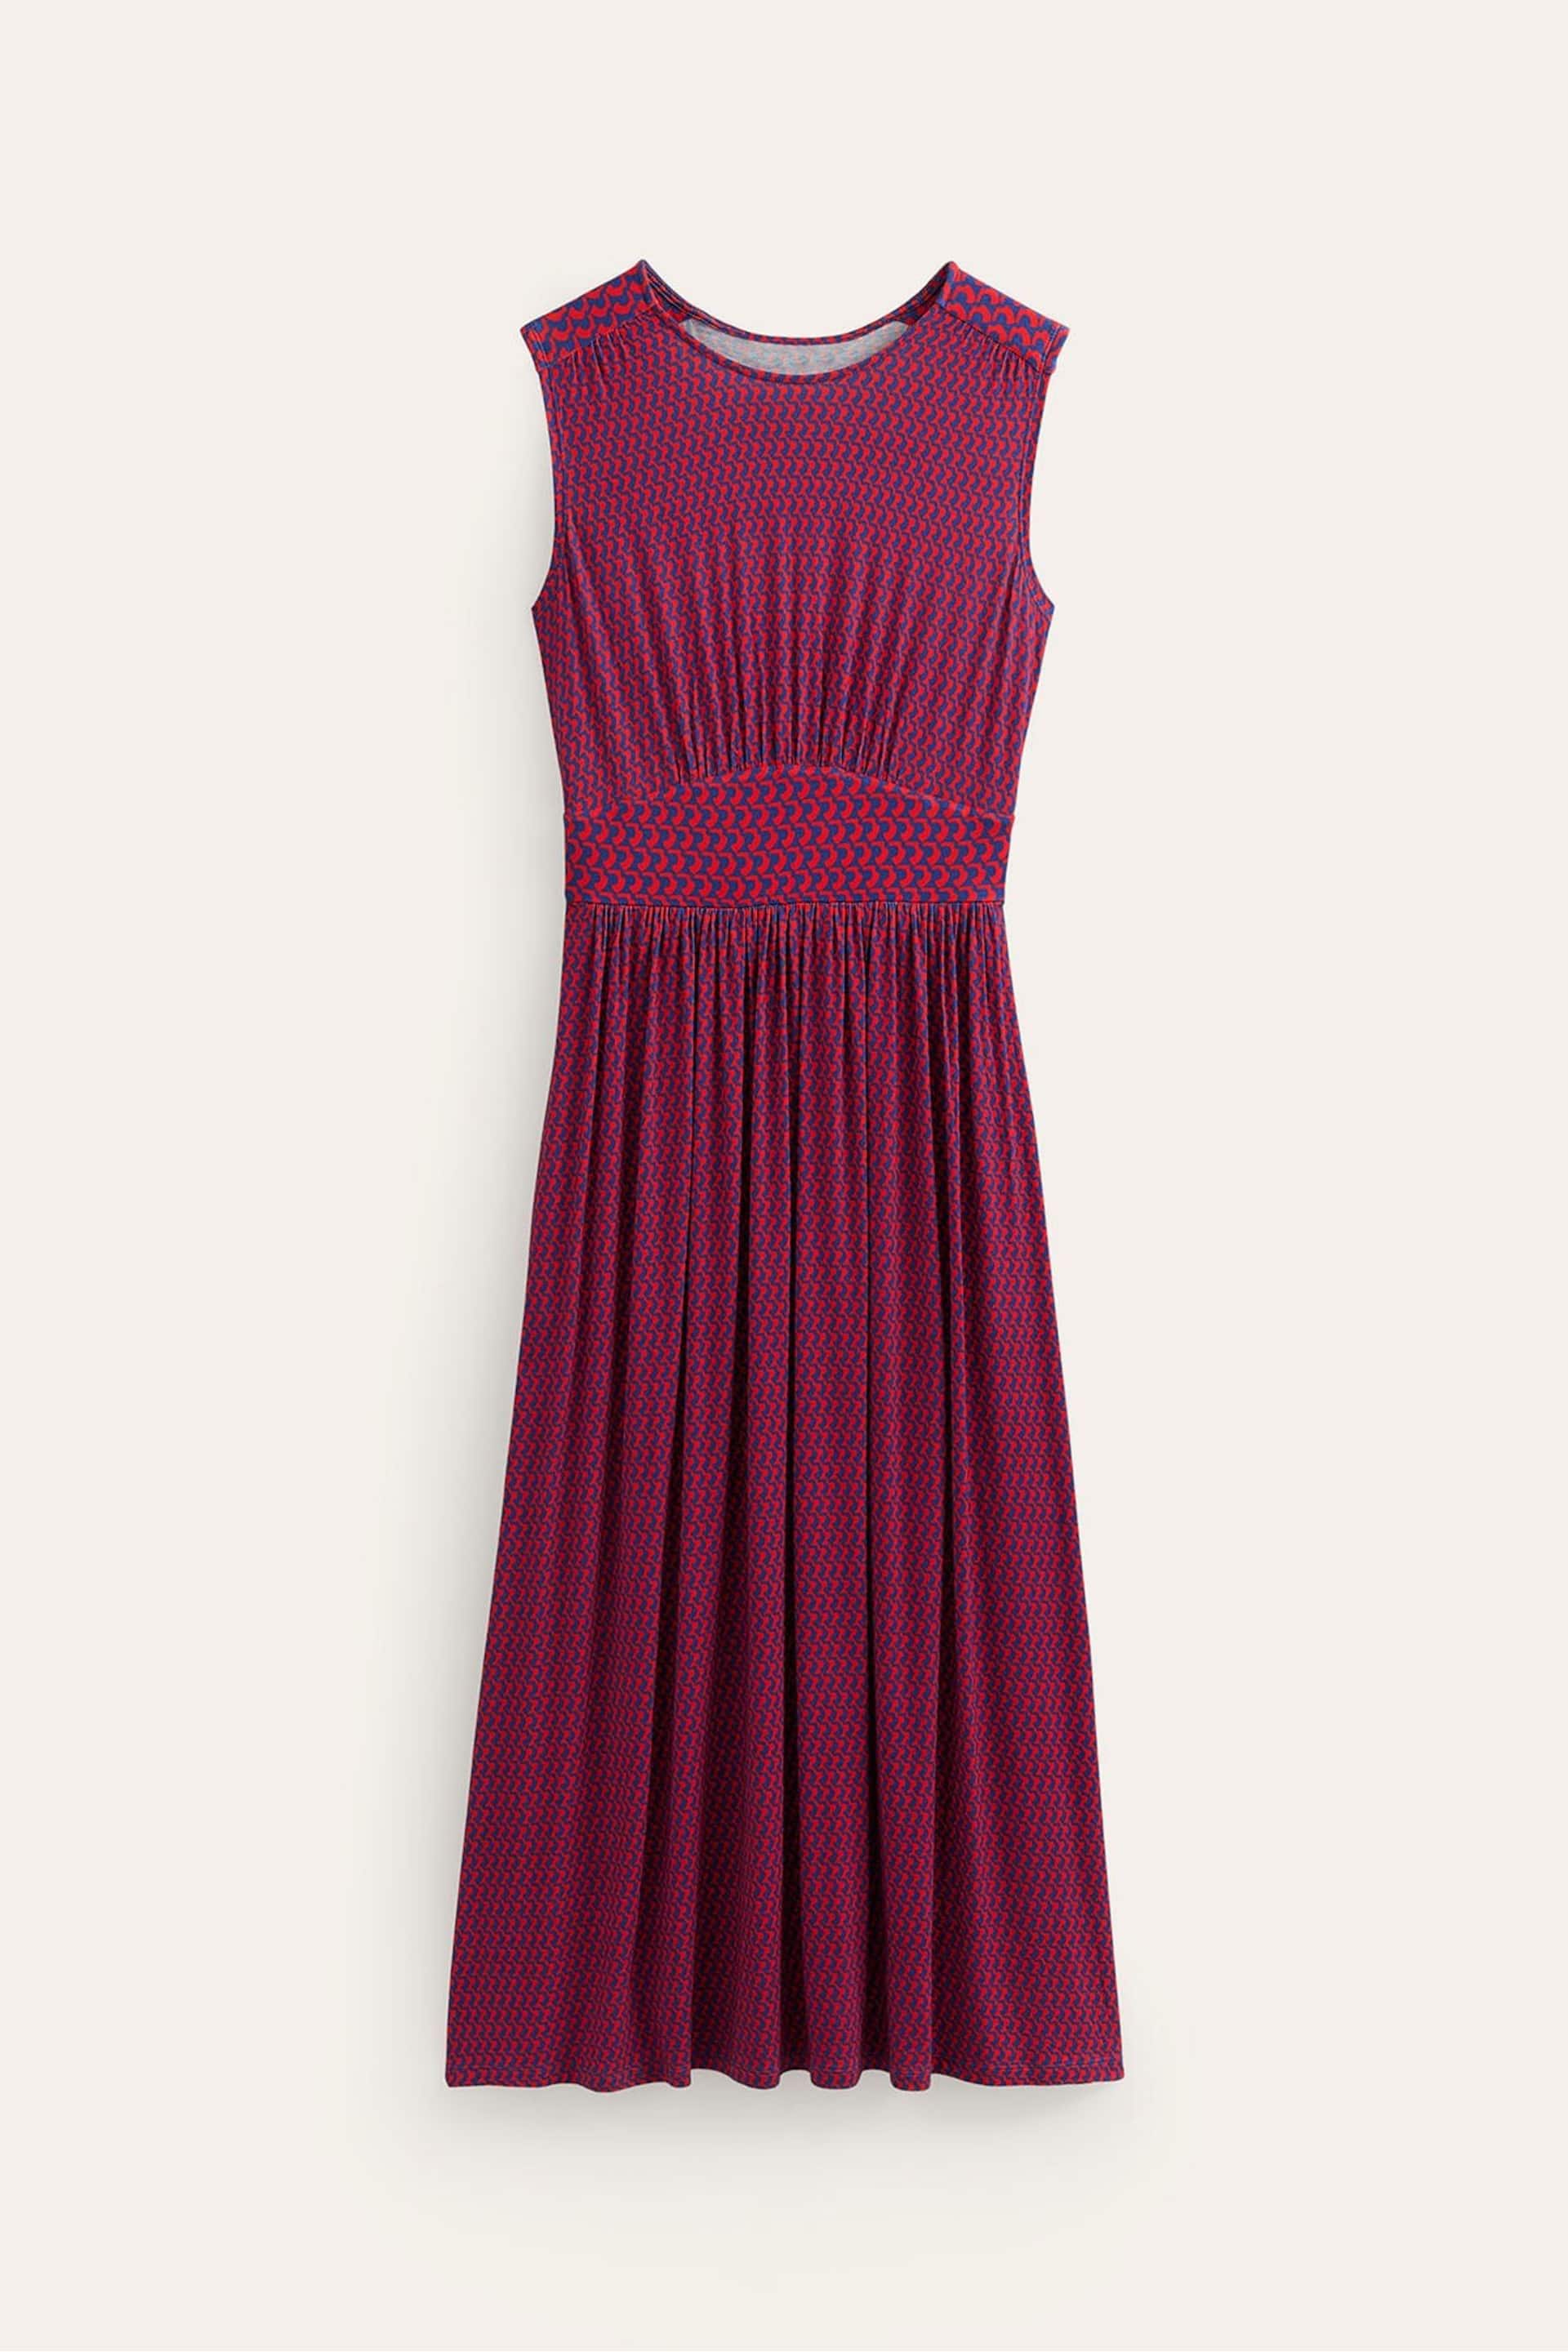 Boden Red Thea Sleeveless Midi Dress - Image 5 of 5